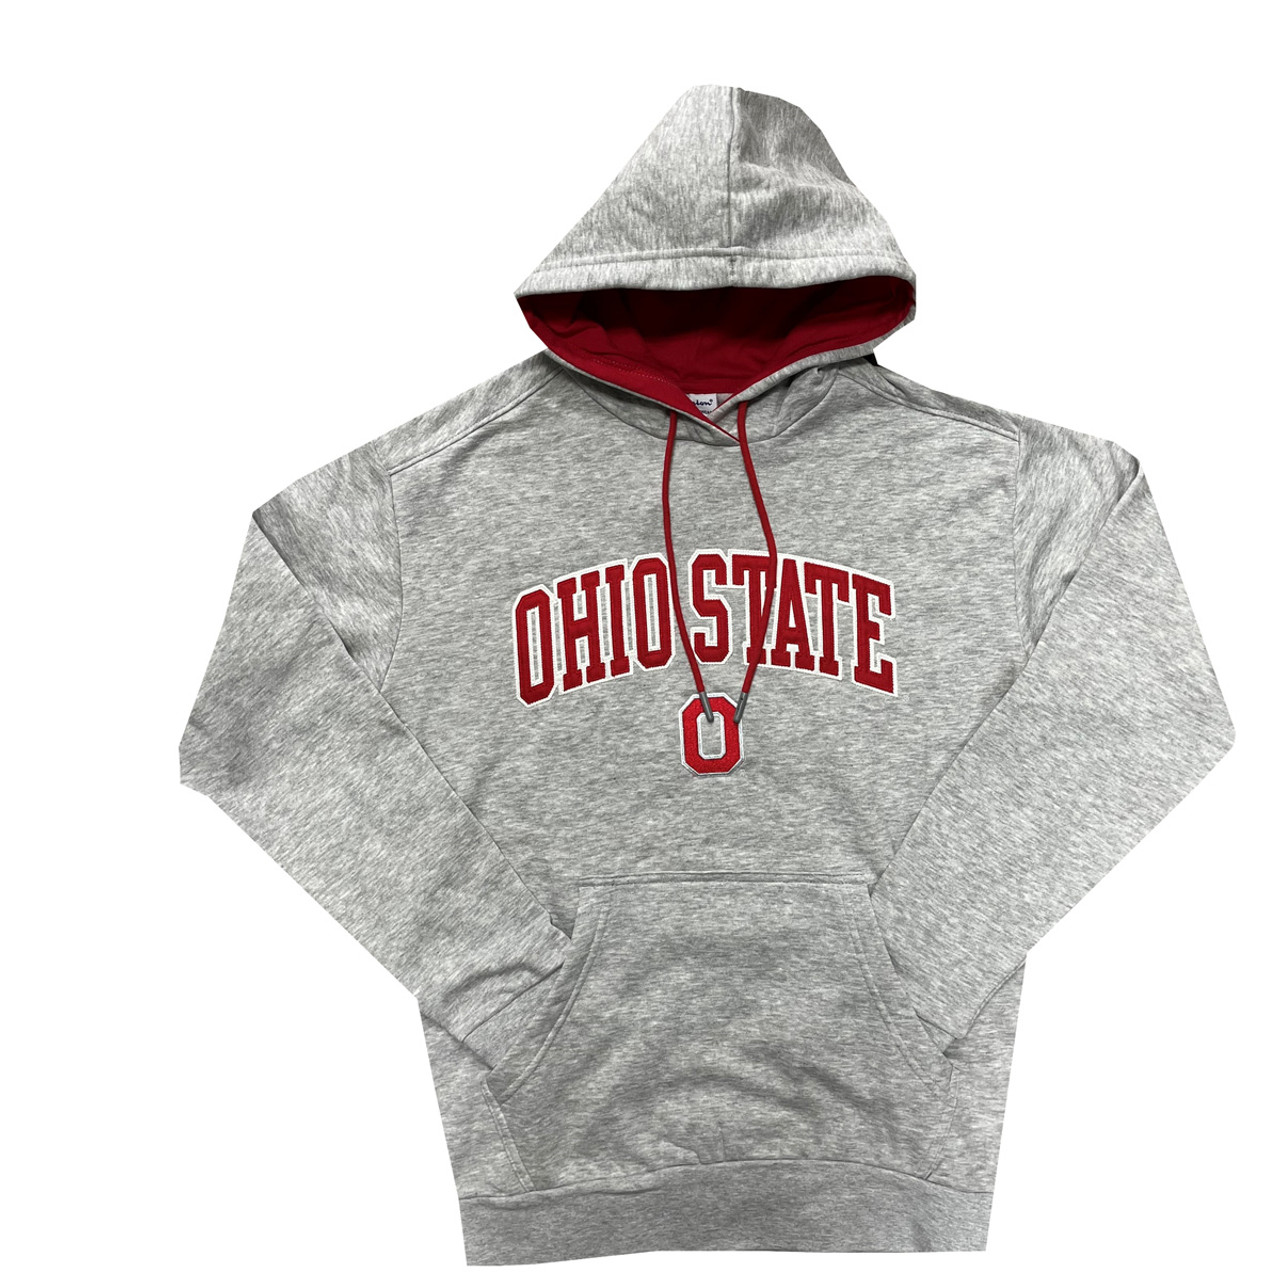 Ohio State Steel Hood w/Applique Logo. - College Traditions